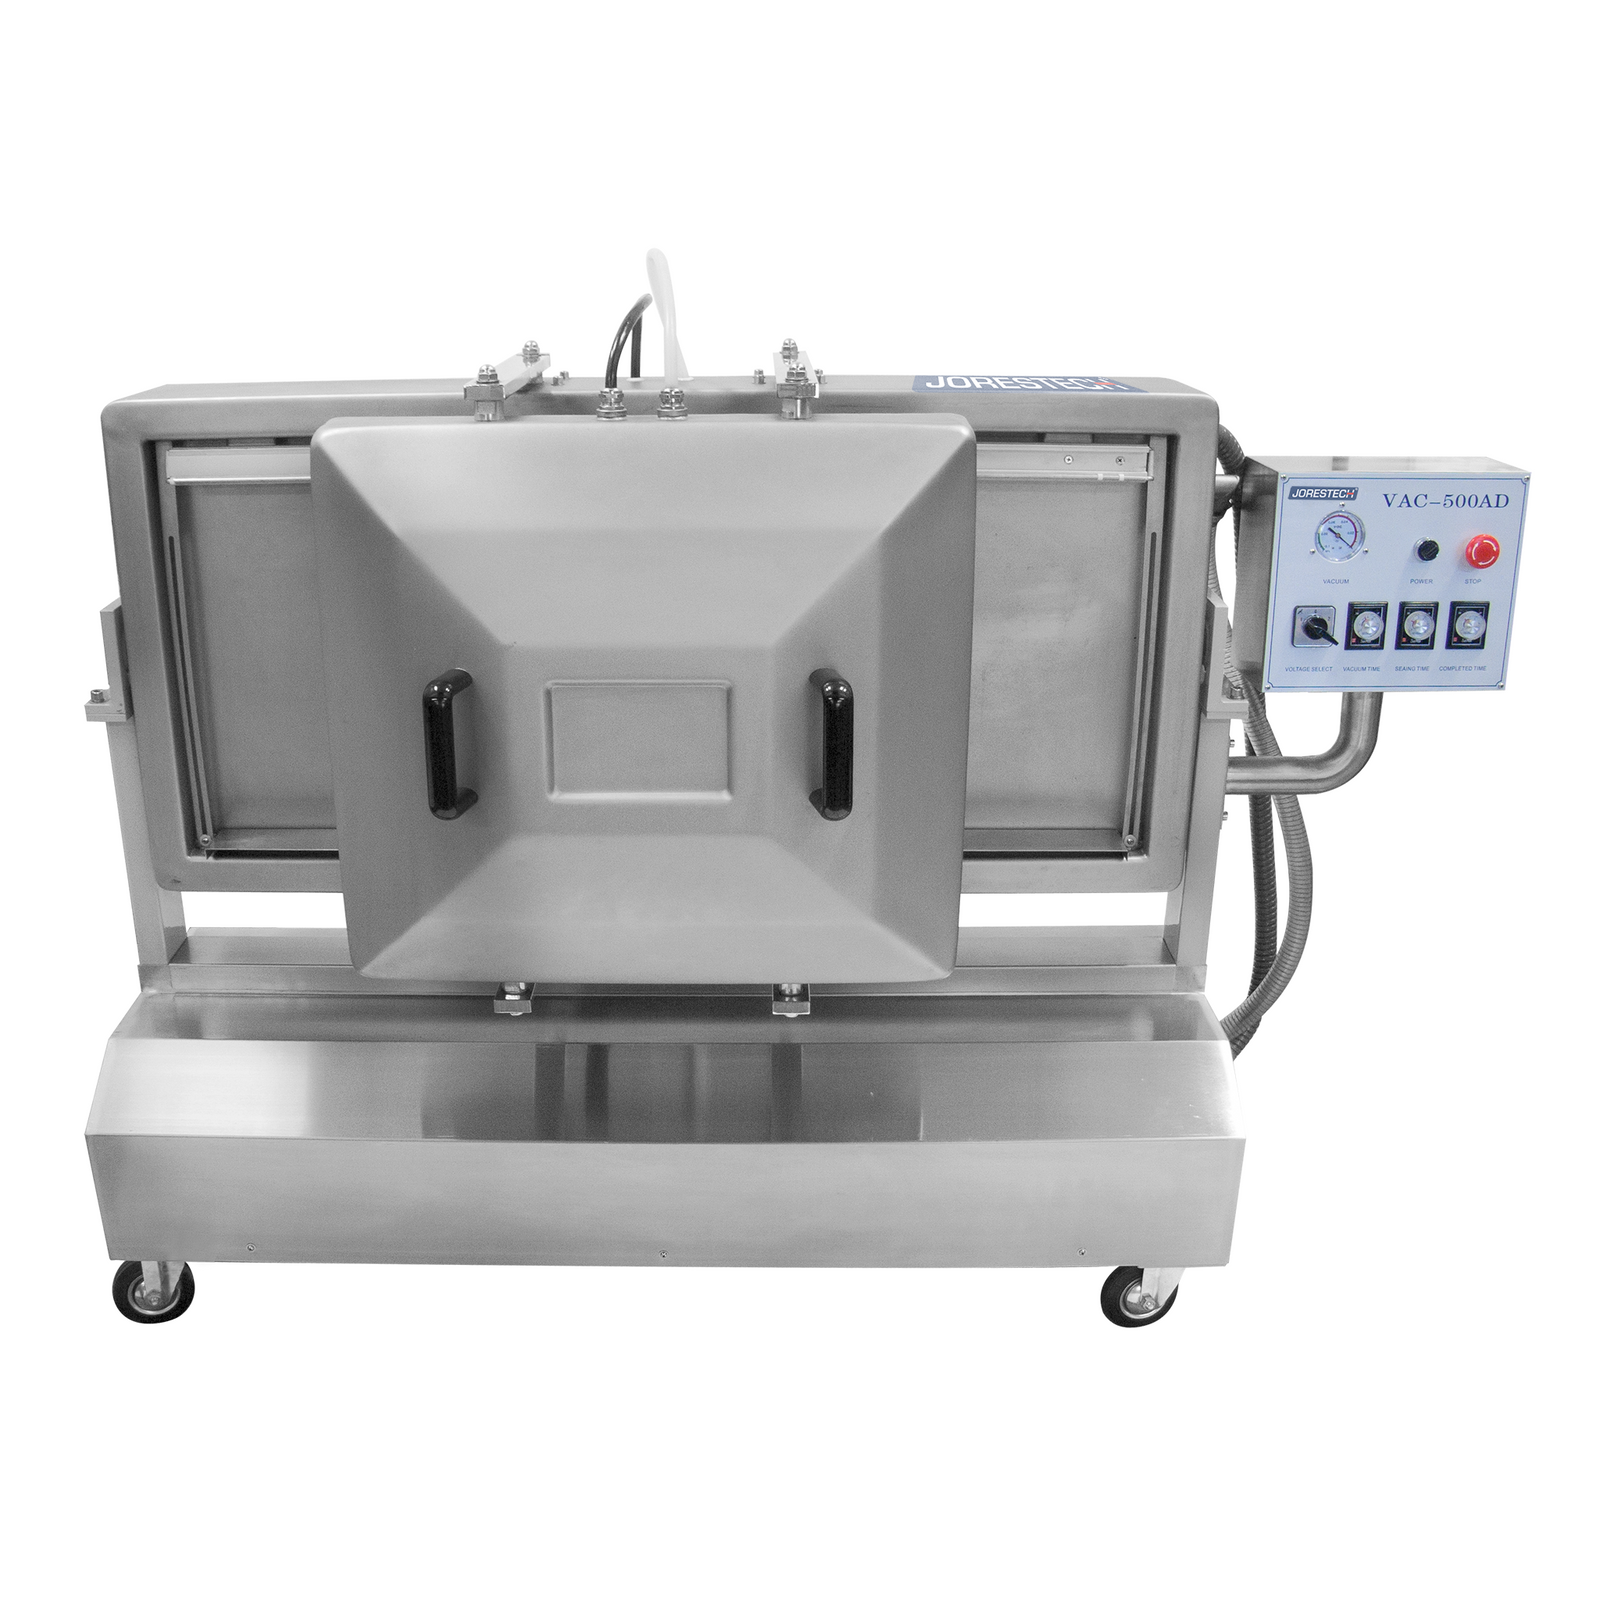 Front of the JORES TECHNOLOGIES® two reclinable chamber vacuum sealer. The chamber and sealing structure of the machine are in a vertical position.